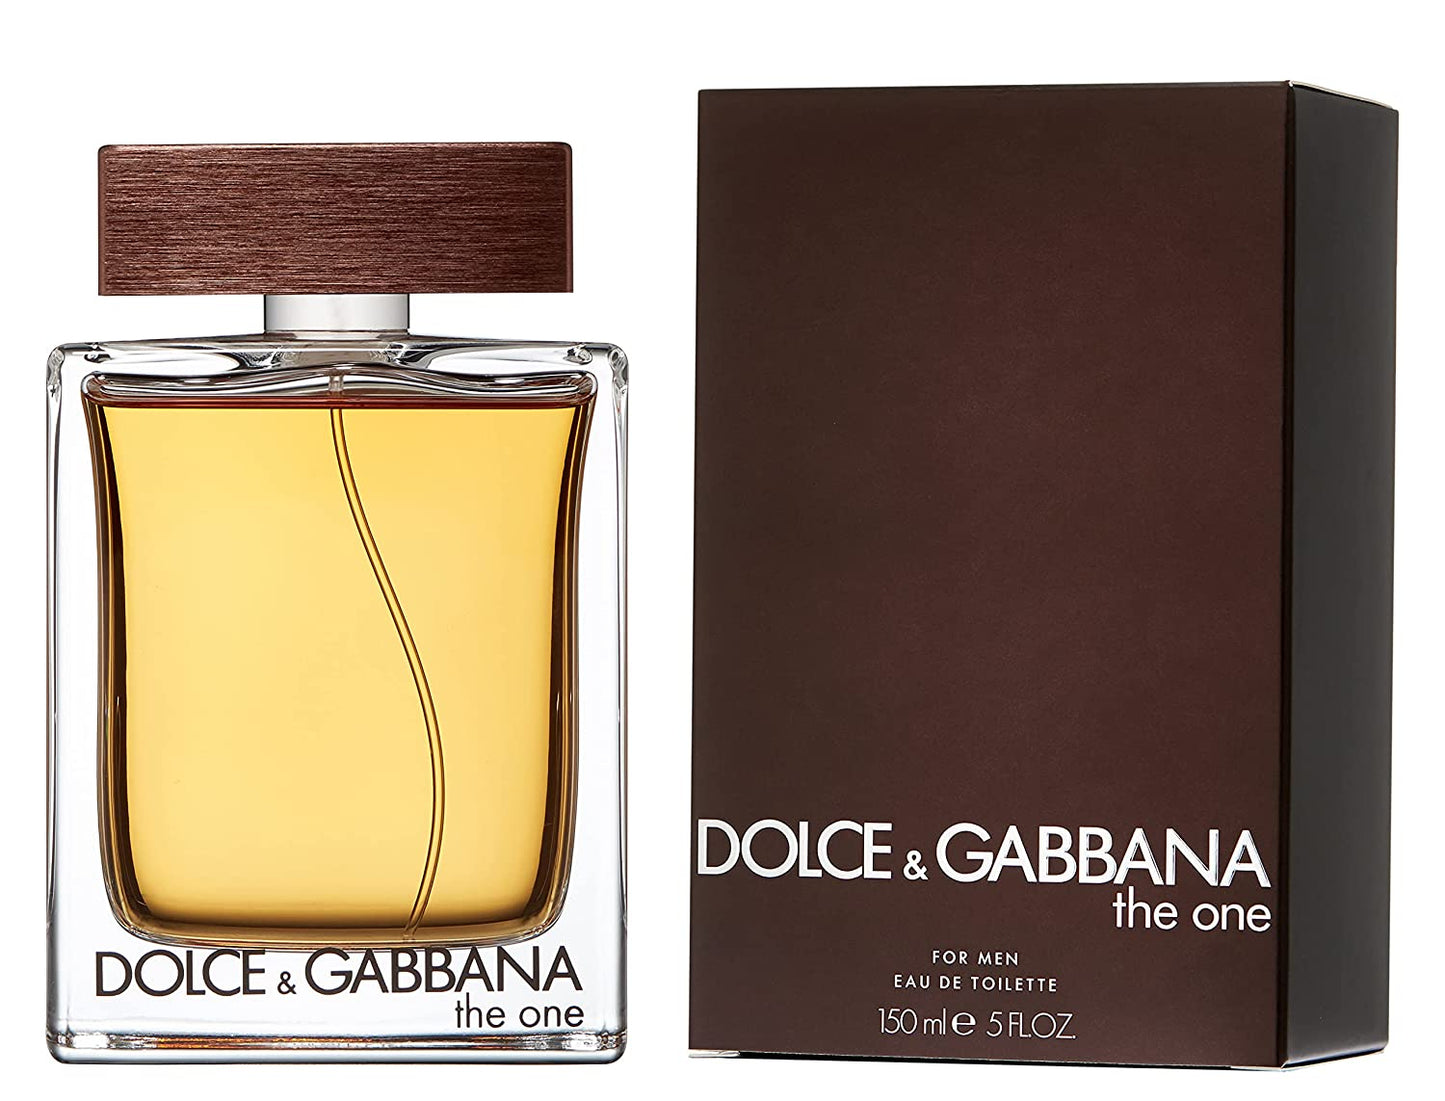 The One By Dolce & Gabbana - Scent In The City - Cologne